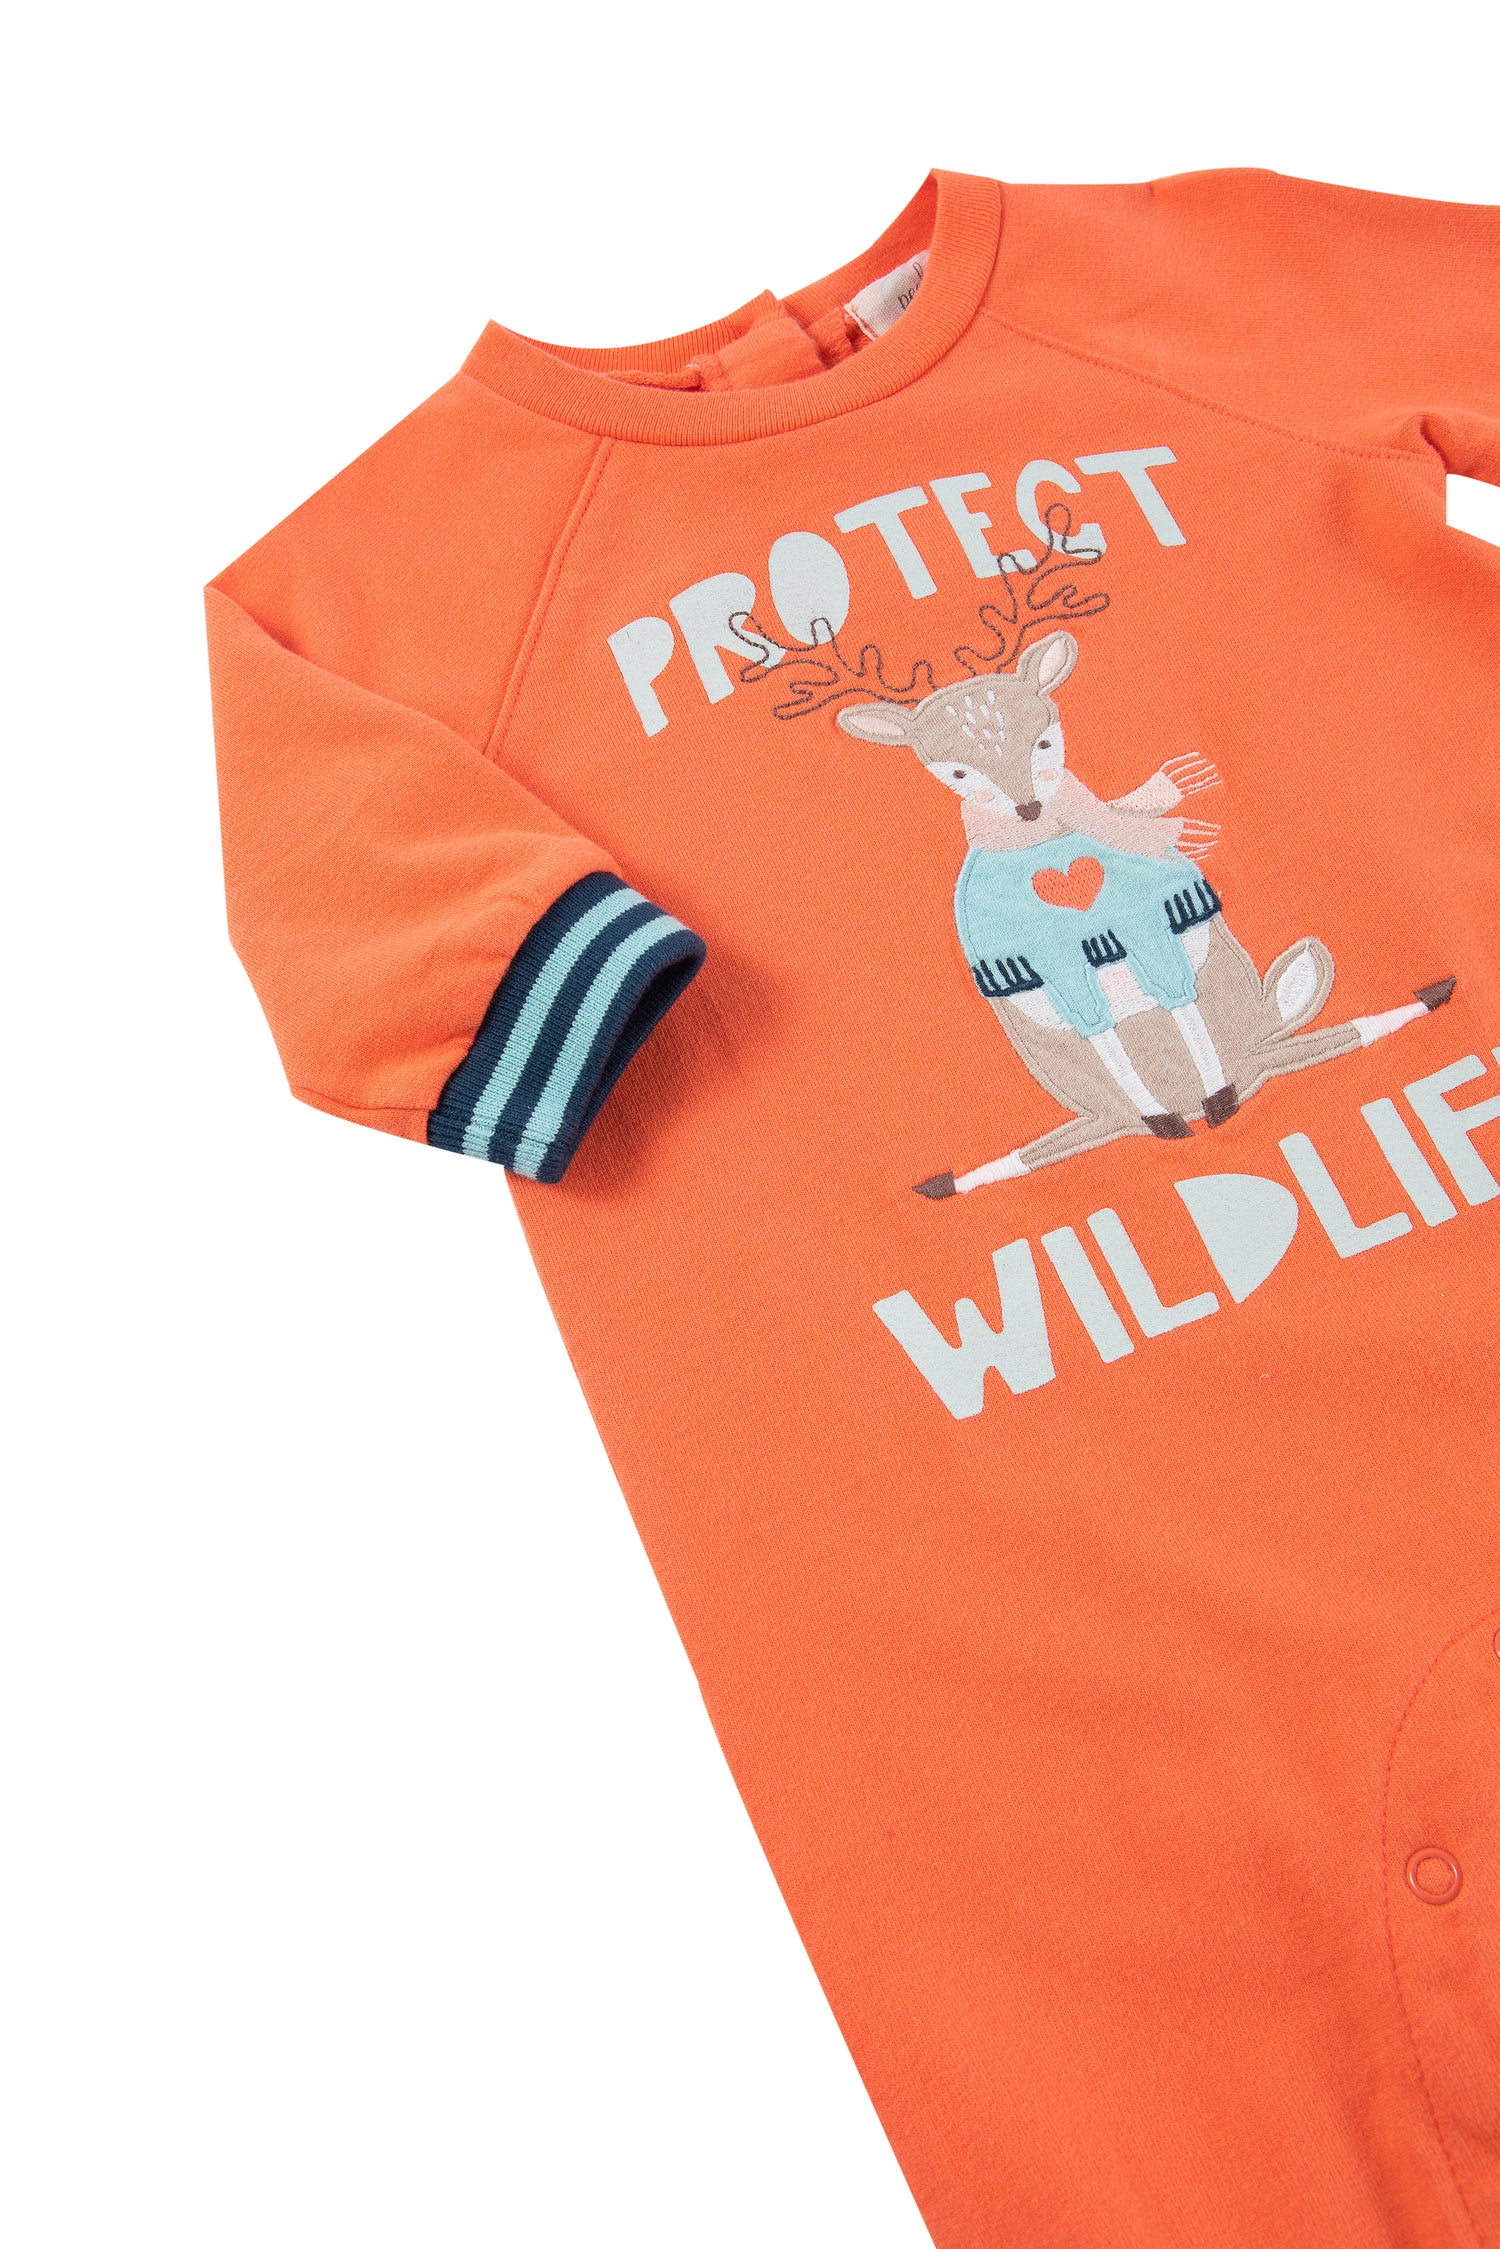 Close up view of orange baby jumpsuit with reindeer and "protect wildlife" written